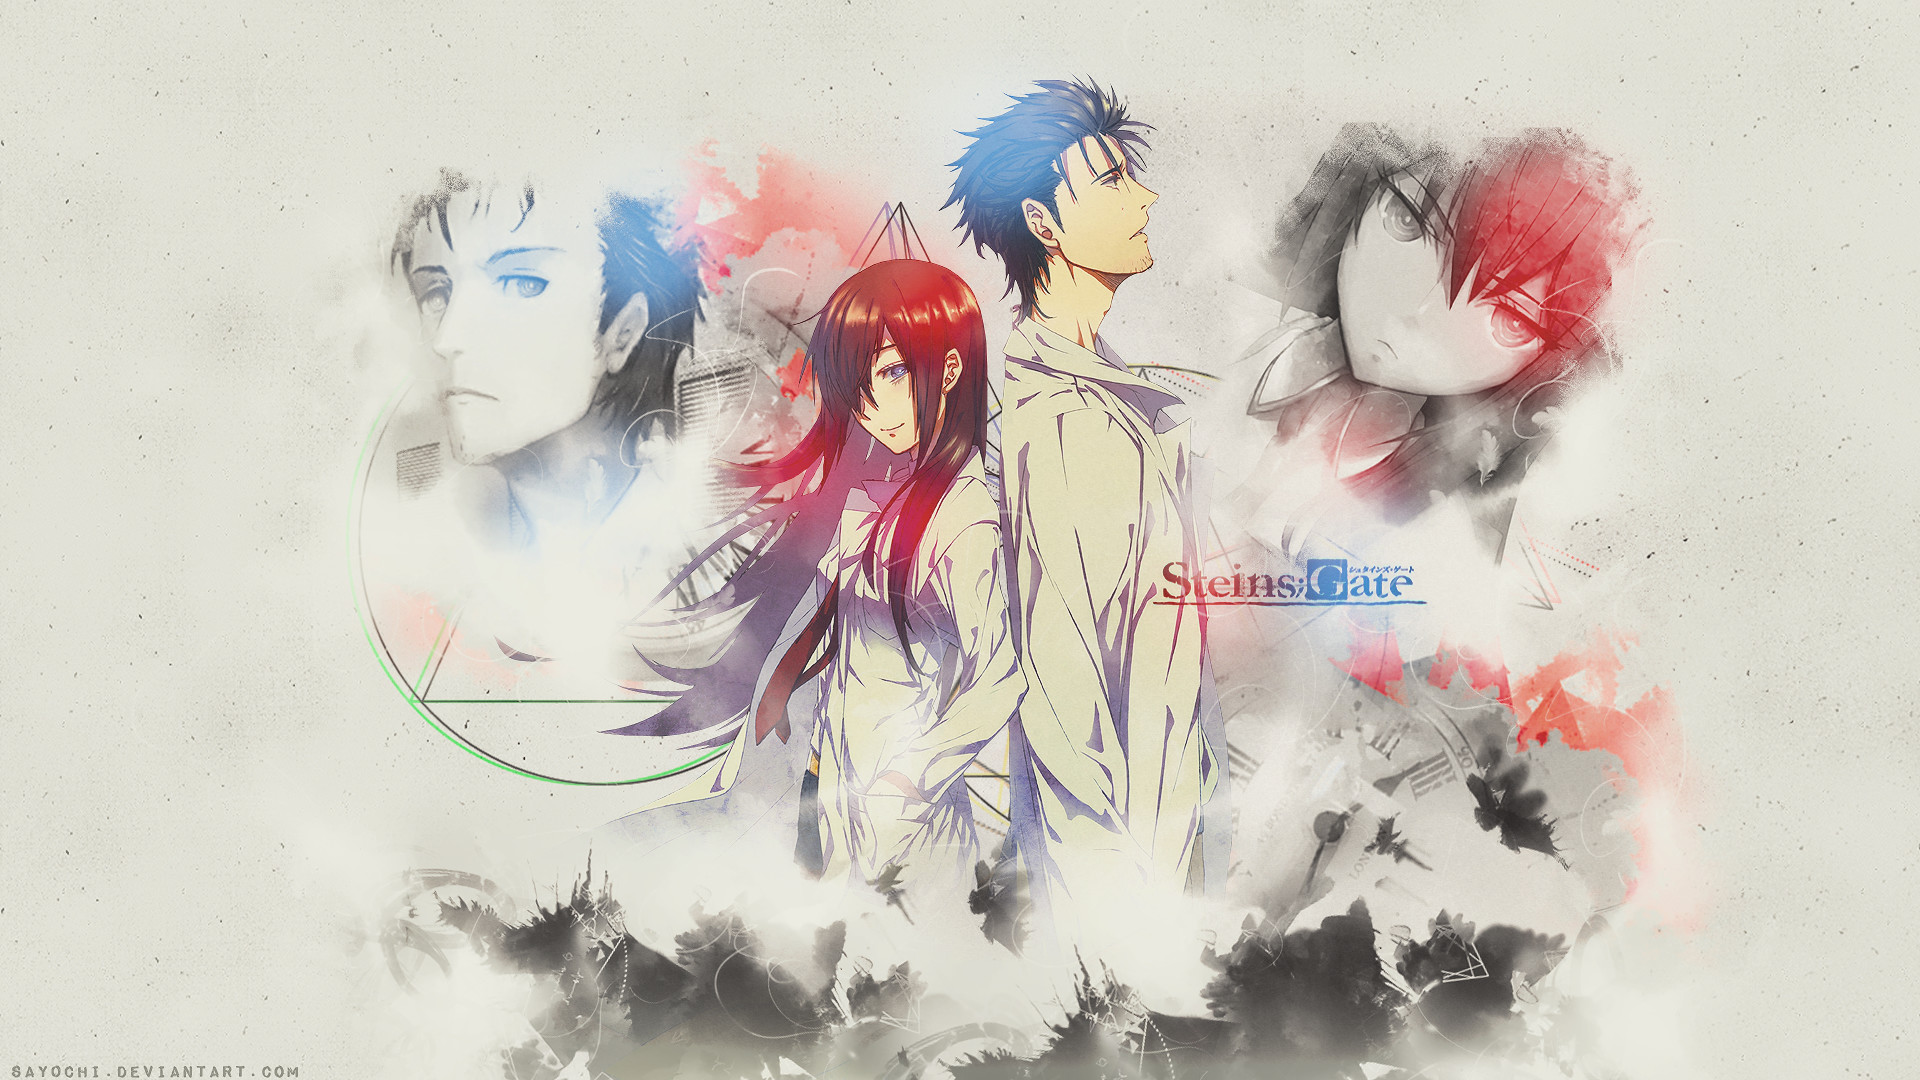 1920x1080 ... Anime Steins Gate Wallpaper [] HD by Say0chi